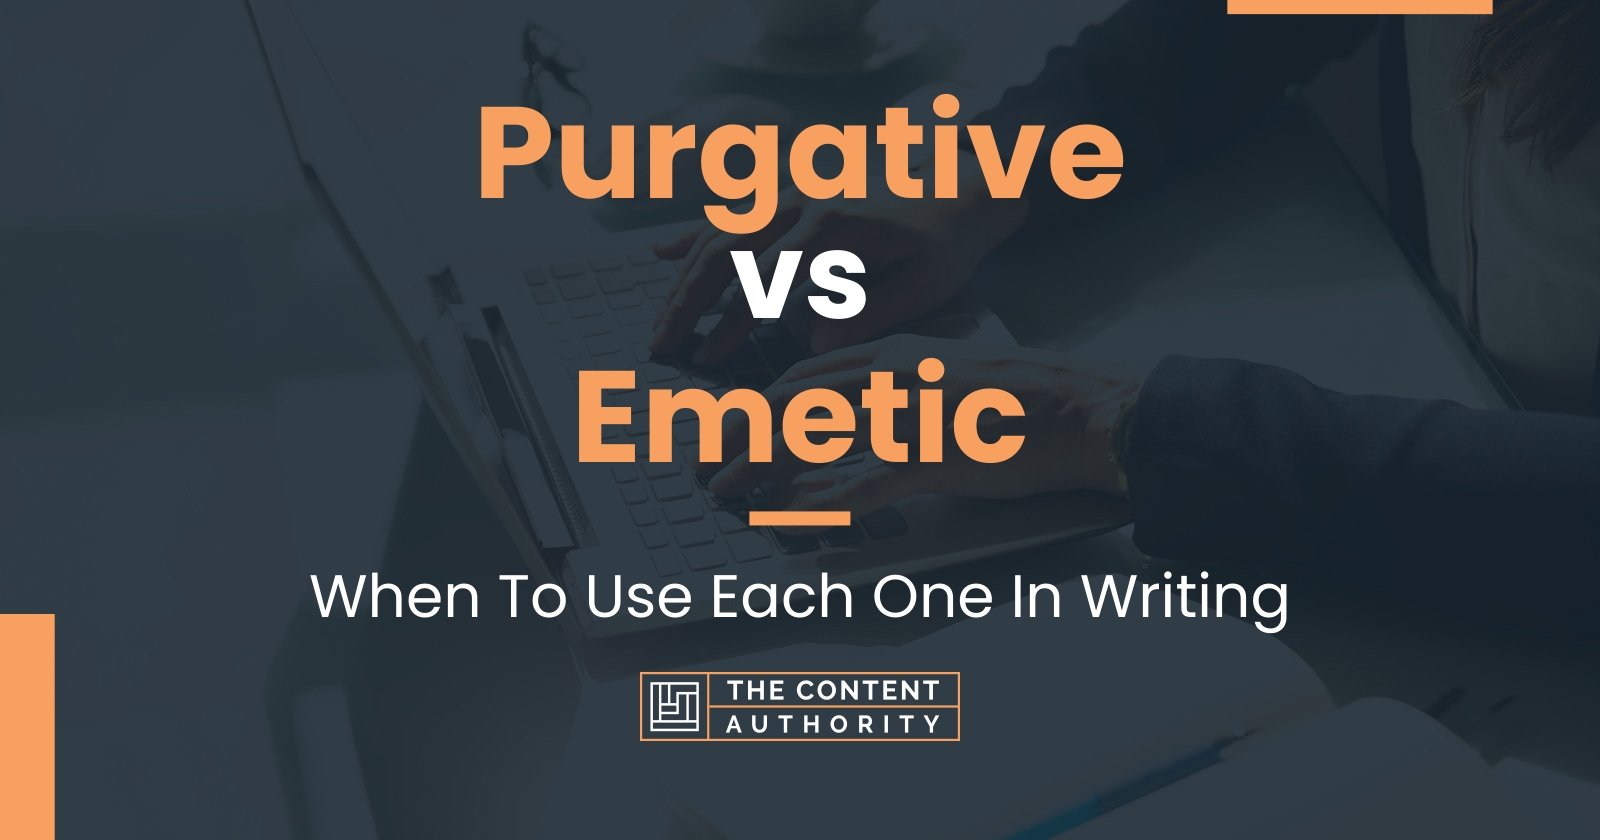 Purgative vs Emetic: When To Use Each One In Writing